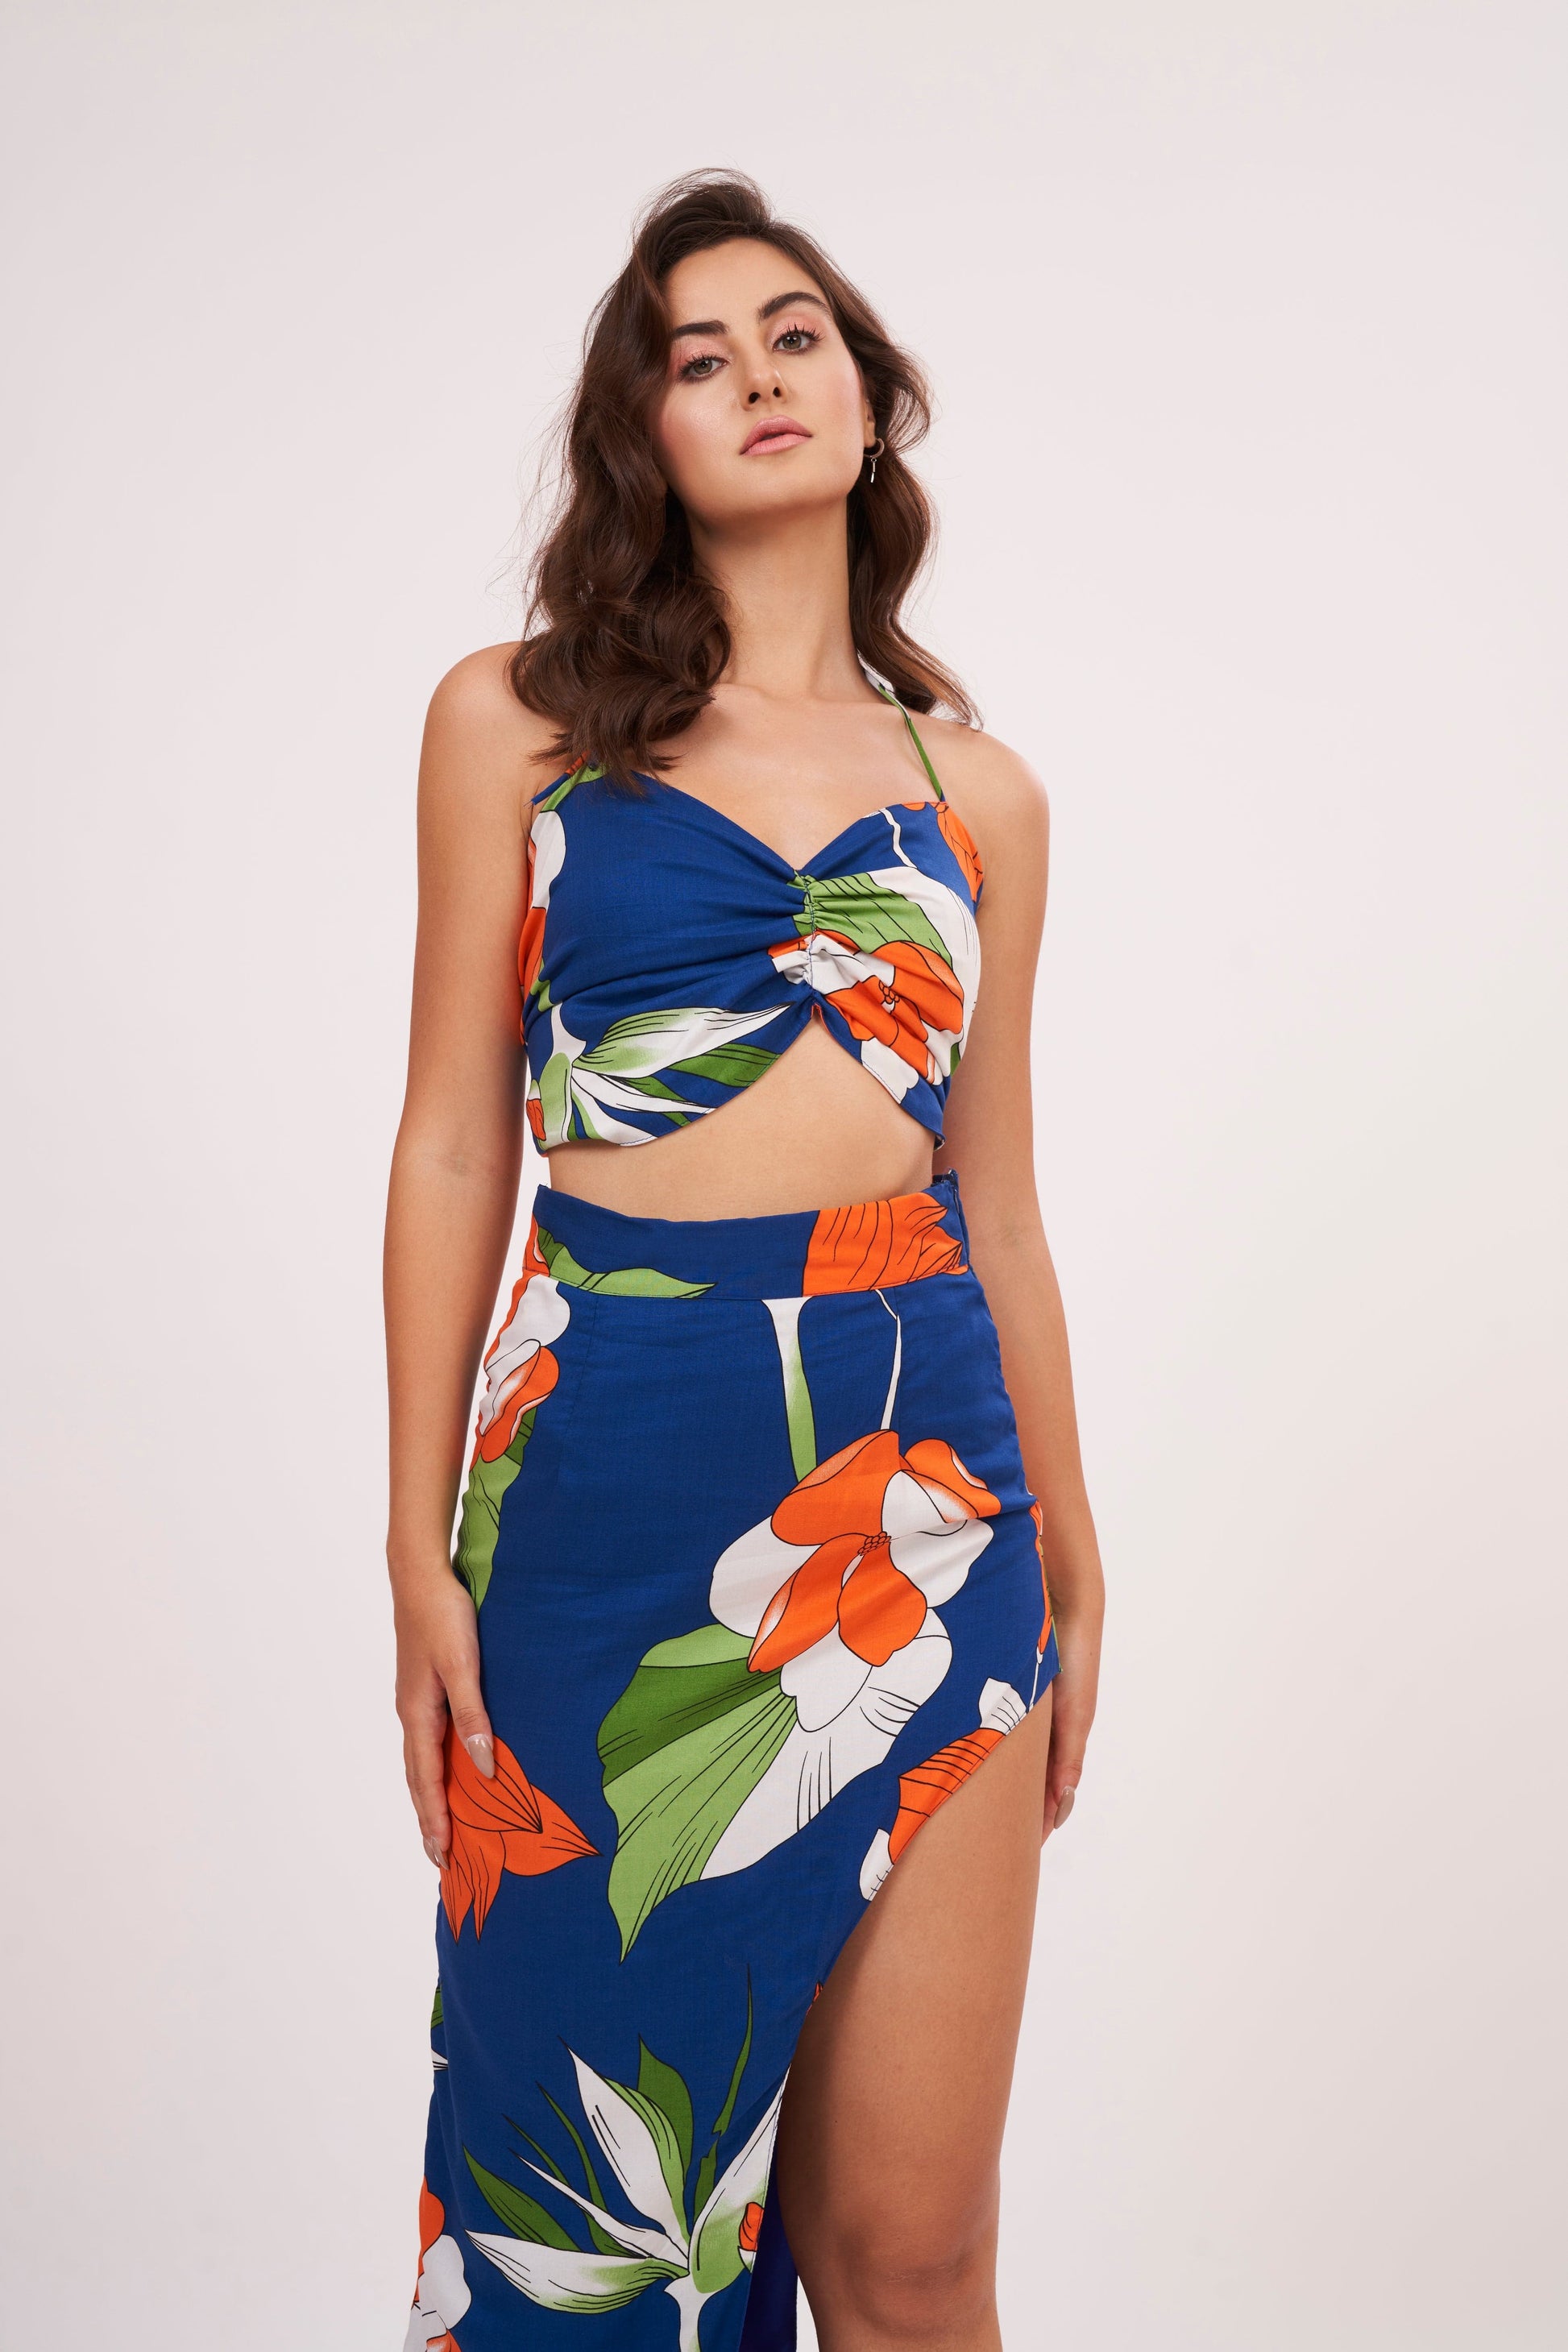 Designer crop top with intricate floral patterns in bold hues. Ruched gathering along bodice for snug fit. Made from high-quality muslin, perfect for any occasion.